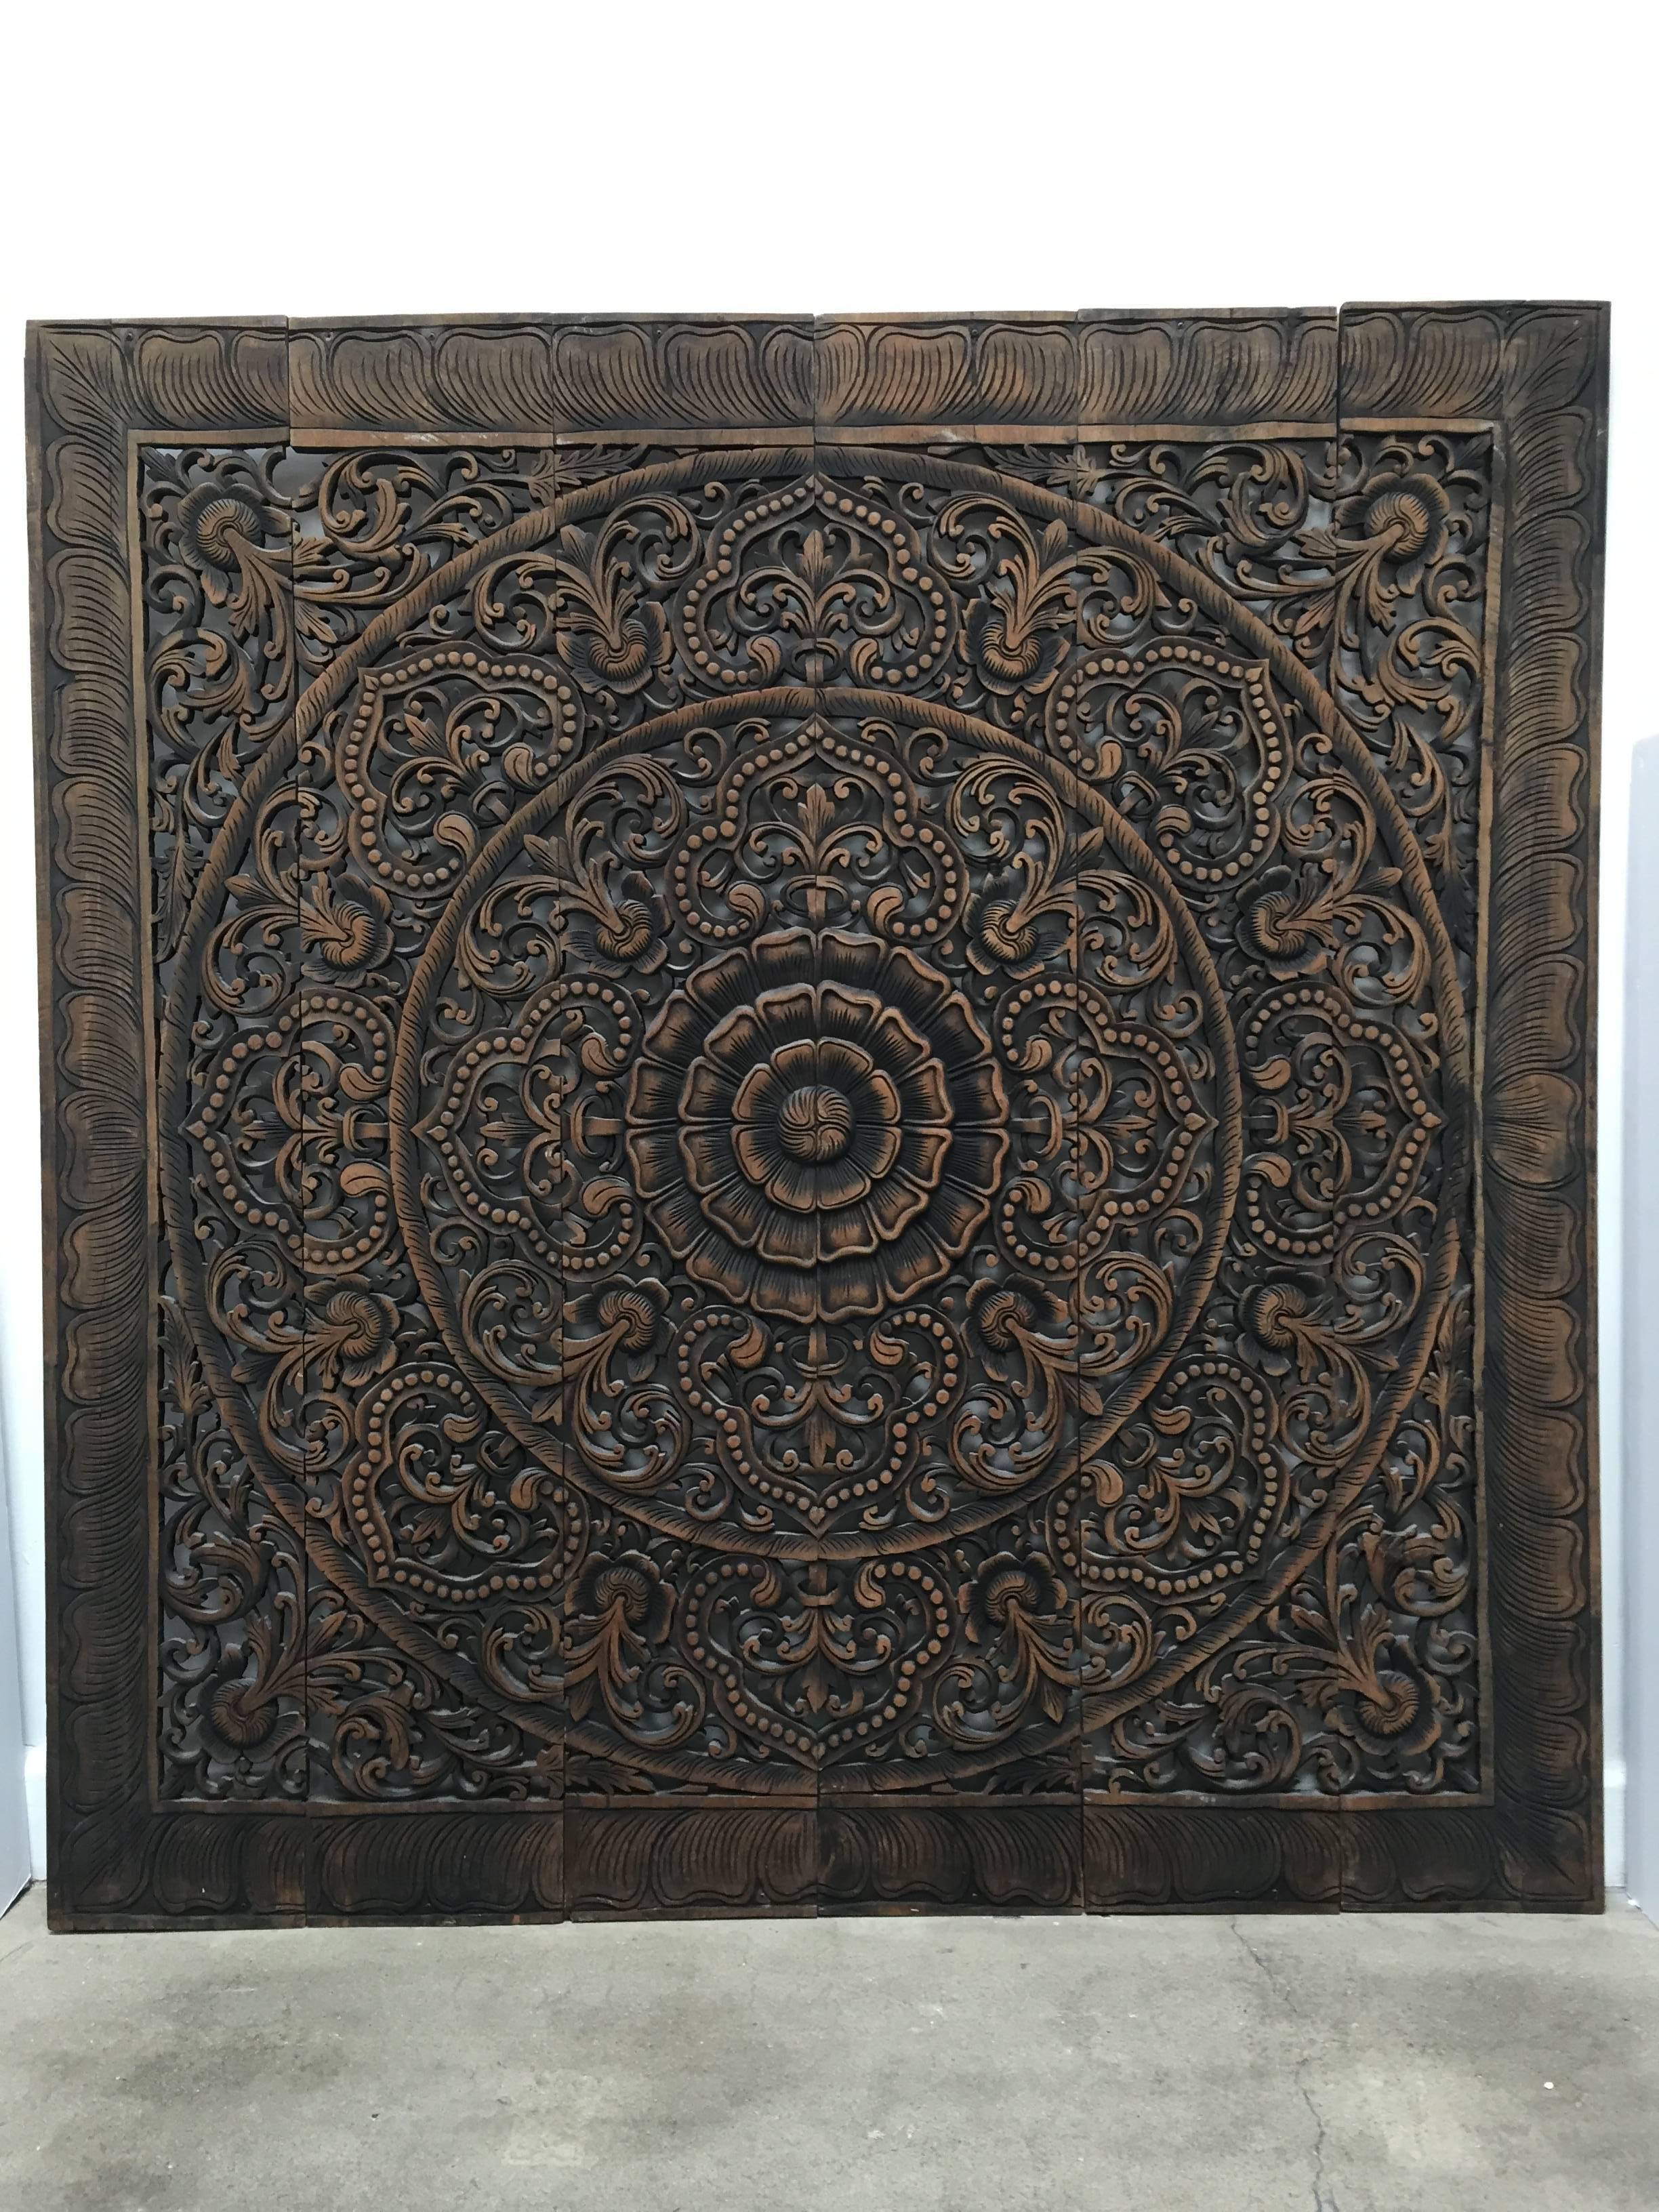 Intricately hand-carved Balinese decorative lotus wall art panel.
This beautifully carved ceiling panel is made and from teak wood and features flower lotus motifs.
Large oversized handcrafted teak wood in traditional intricate lotus floral